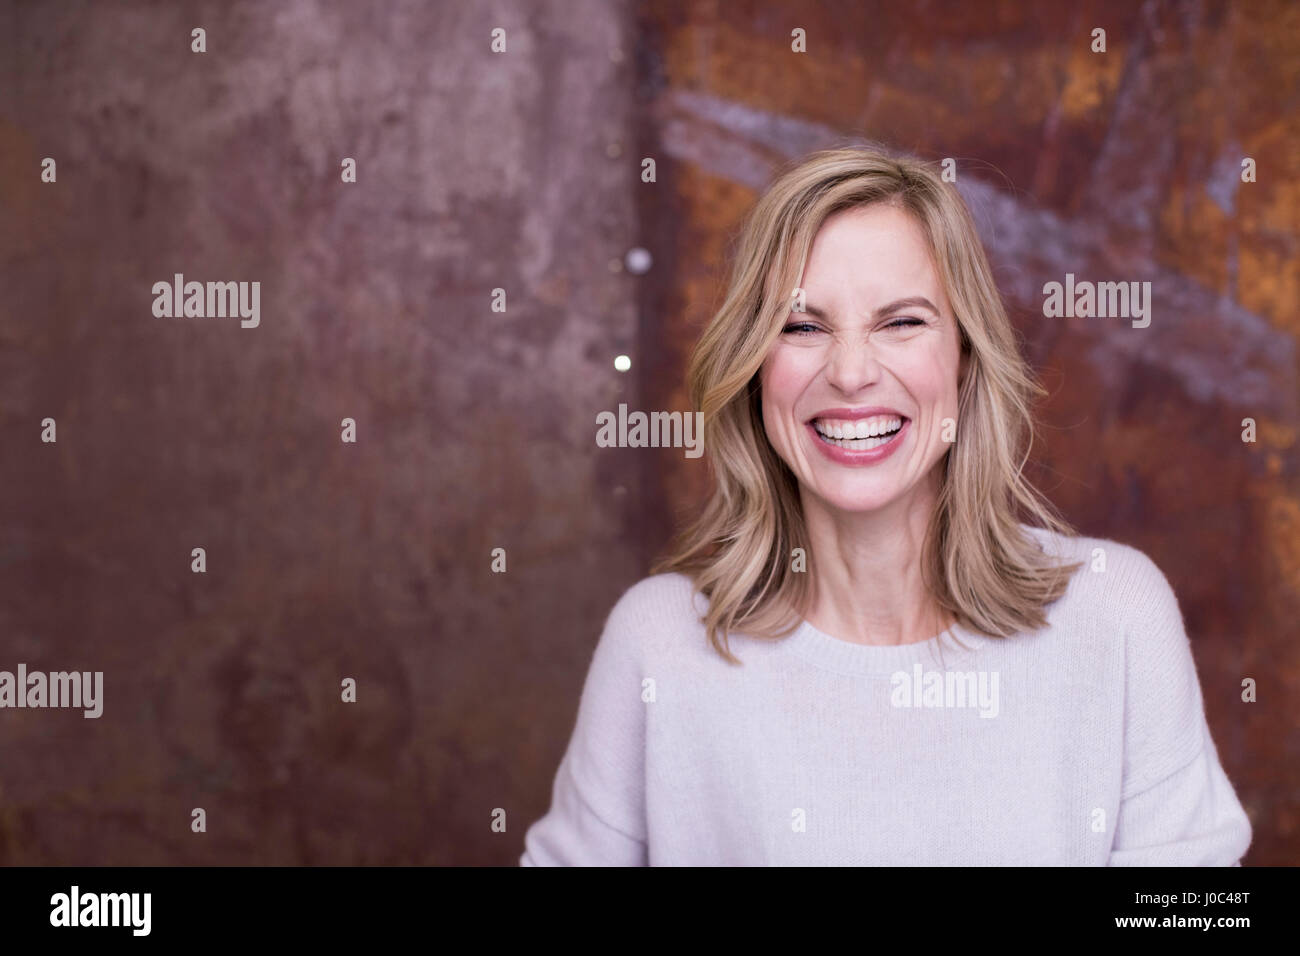 Portrait of mid adult woman, smiling Stock Photo